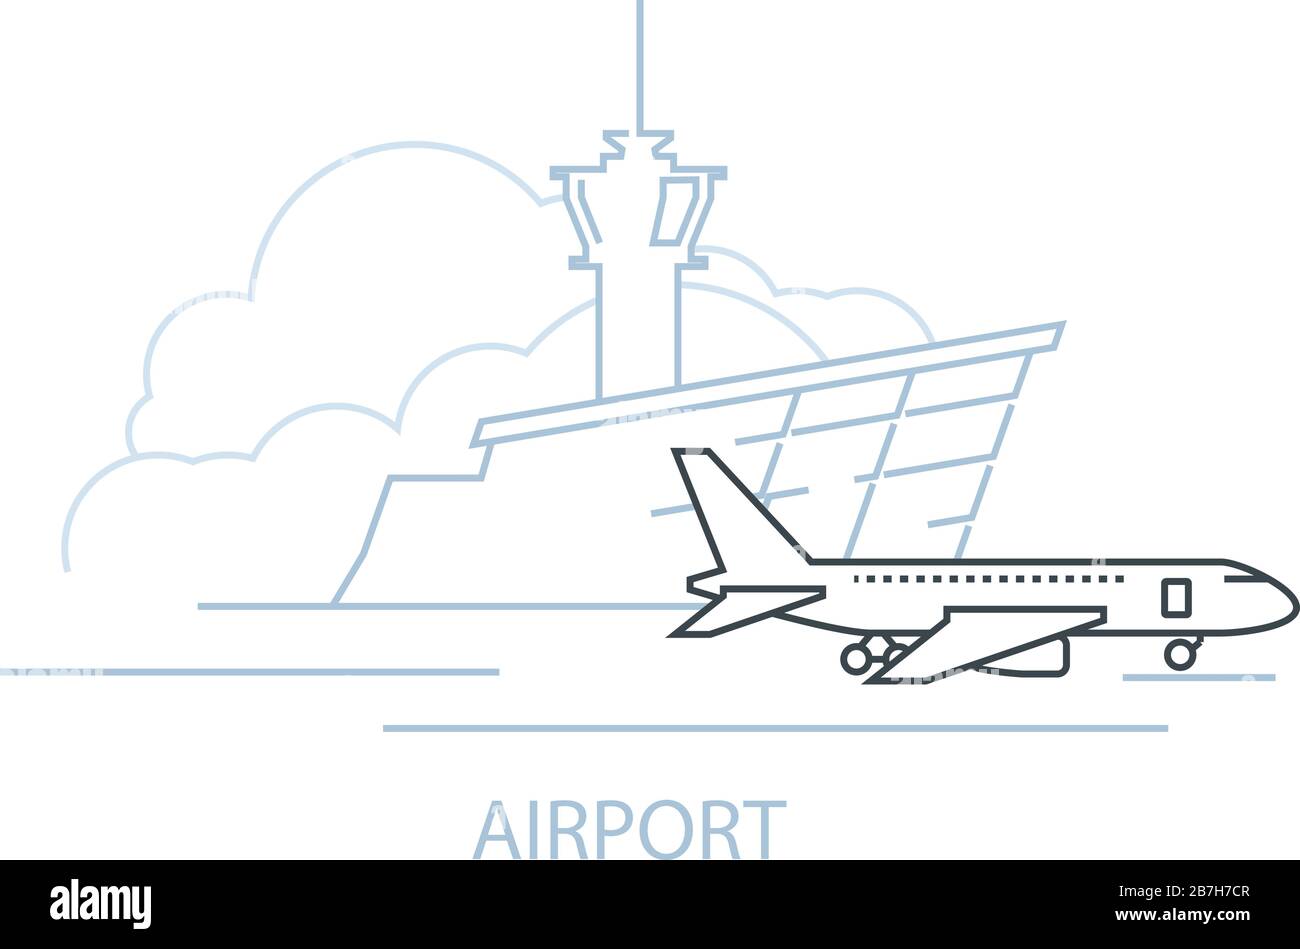 Airport terminal building and airplane on landing strip, icon of airport, line style Stock Vector